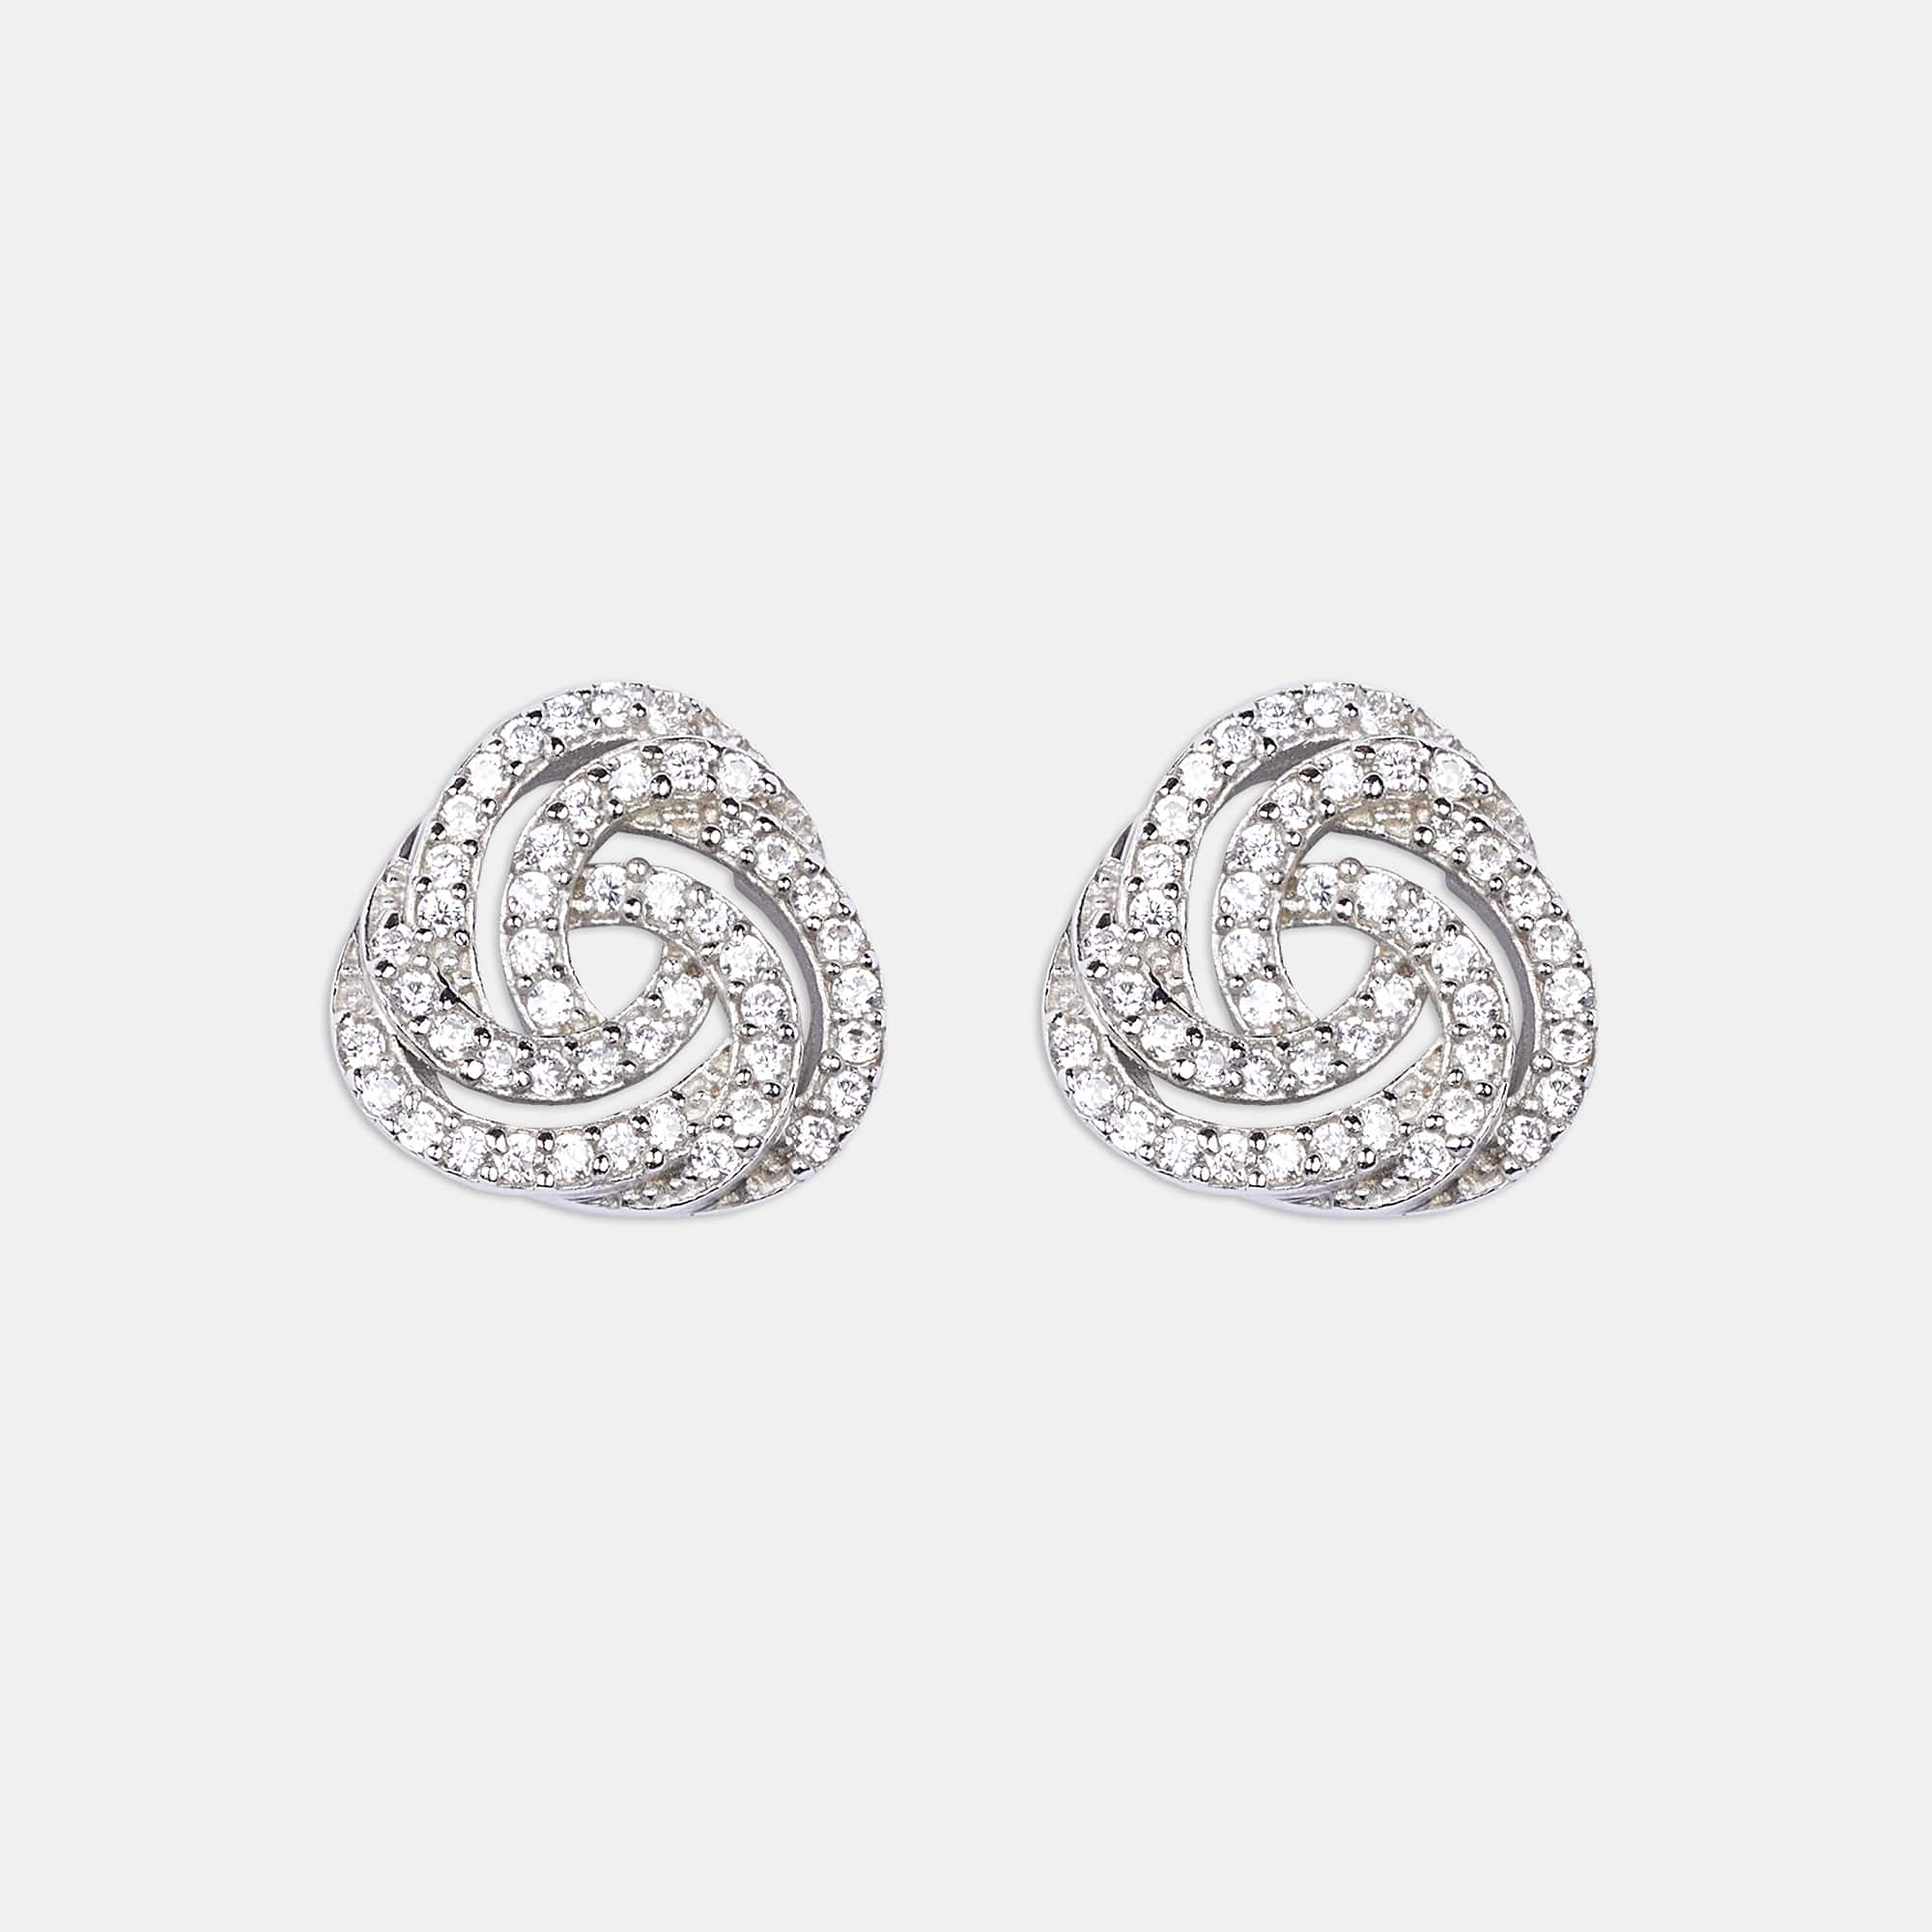 Elevate your style with these exquisite diamond stud earrings, beautifully set in sterling silver